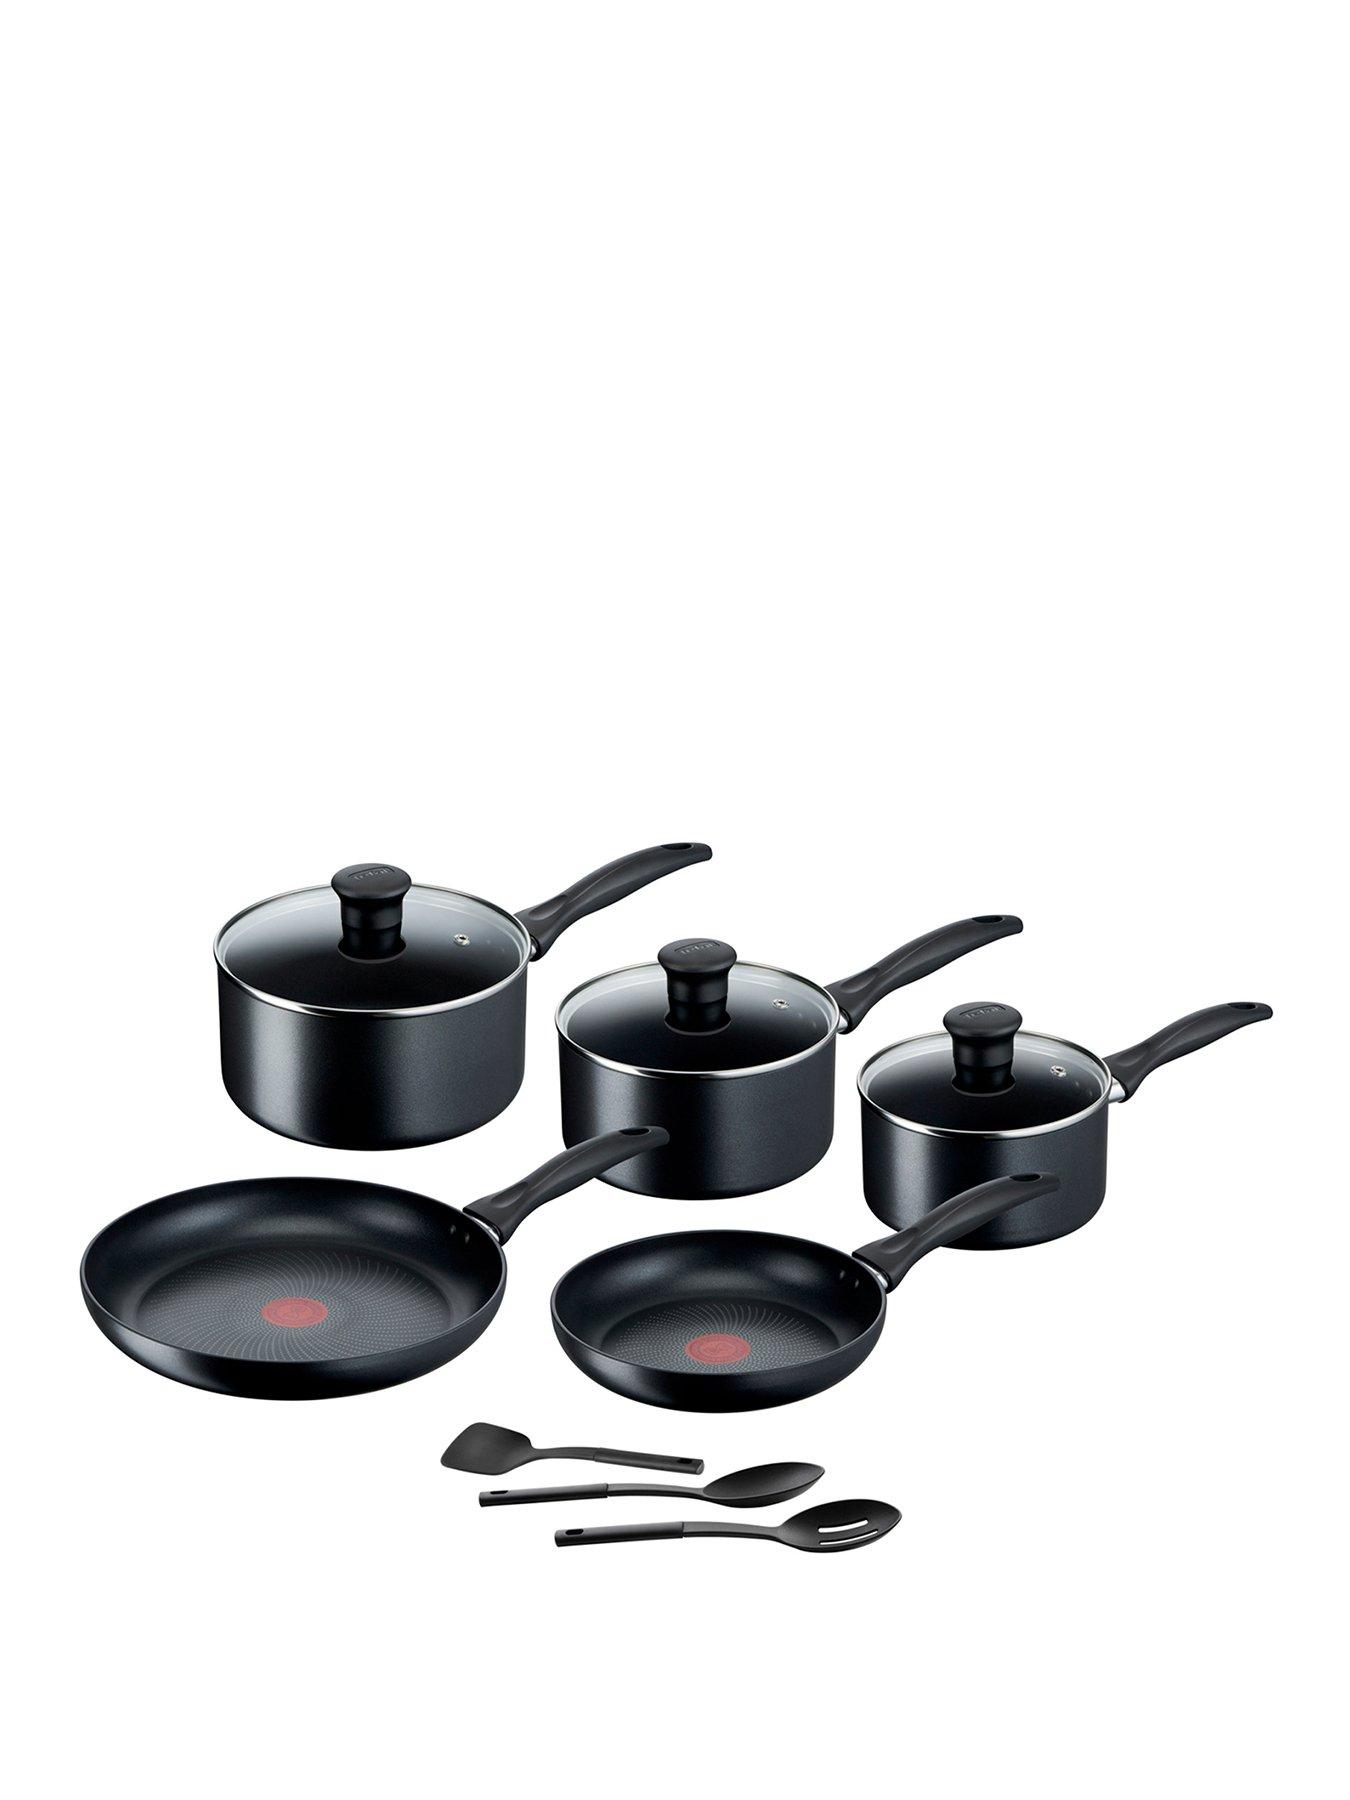 Jamie Oliver By Tefal Ingenio Induction Frypan 3 Piece Set In